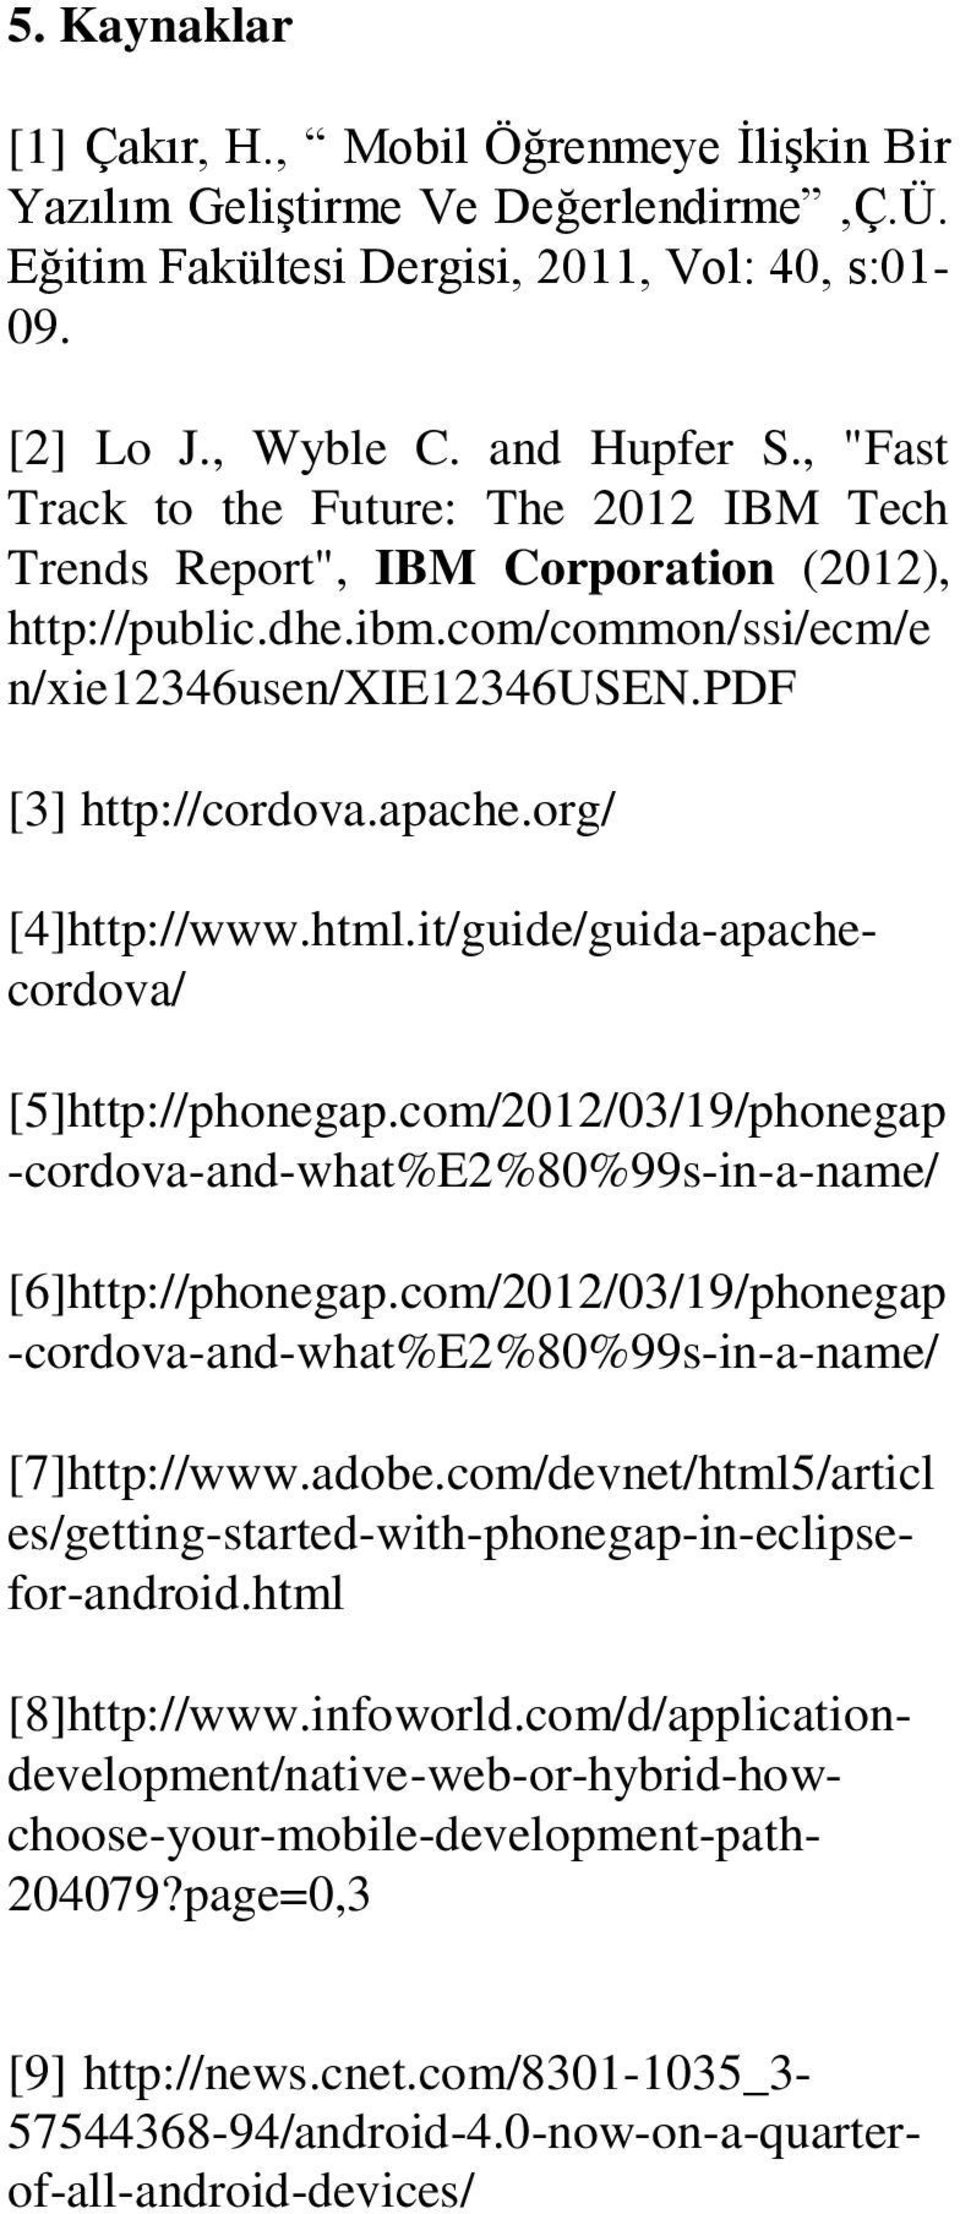 org/ [4]http://www.html.it/guide/guida-apachecordova/ [5]http://phonegap.com/2012/03/19/phonegap -cordova-and-what%e2%80%99s-in-a-name/ [6]http://phonegap.